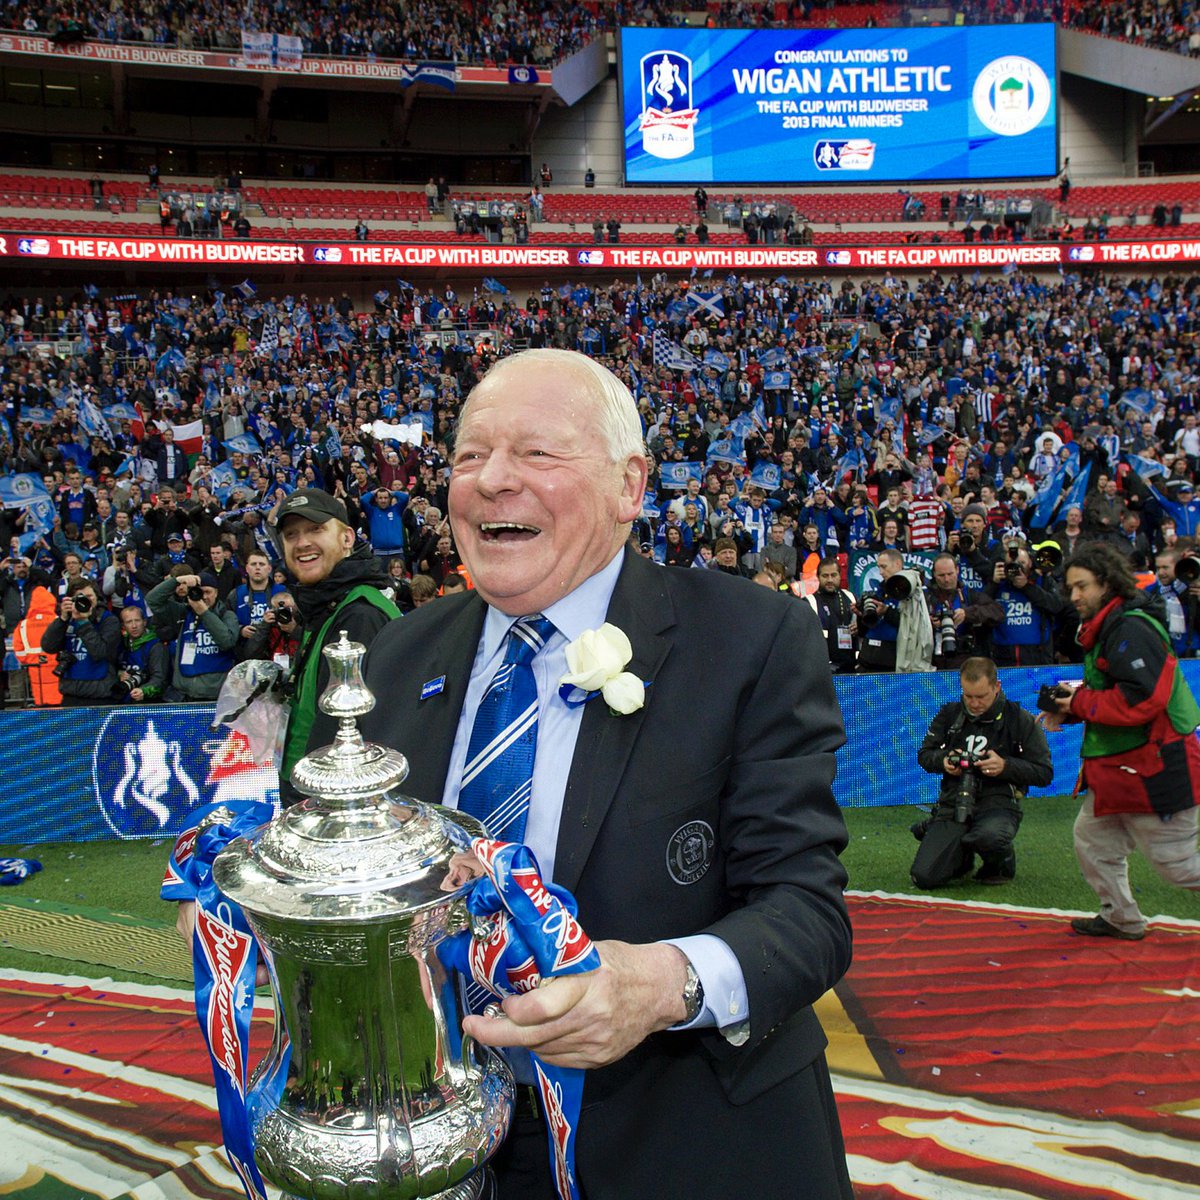 🎉 💙 Wishing a Happy Birthday to Dave Whelan! A Latics legend who helped make all of our wildest dreams become a reality. 🤩 #wafc 🔵⚪️